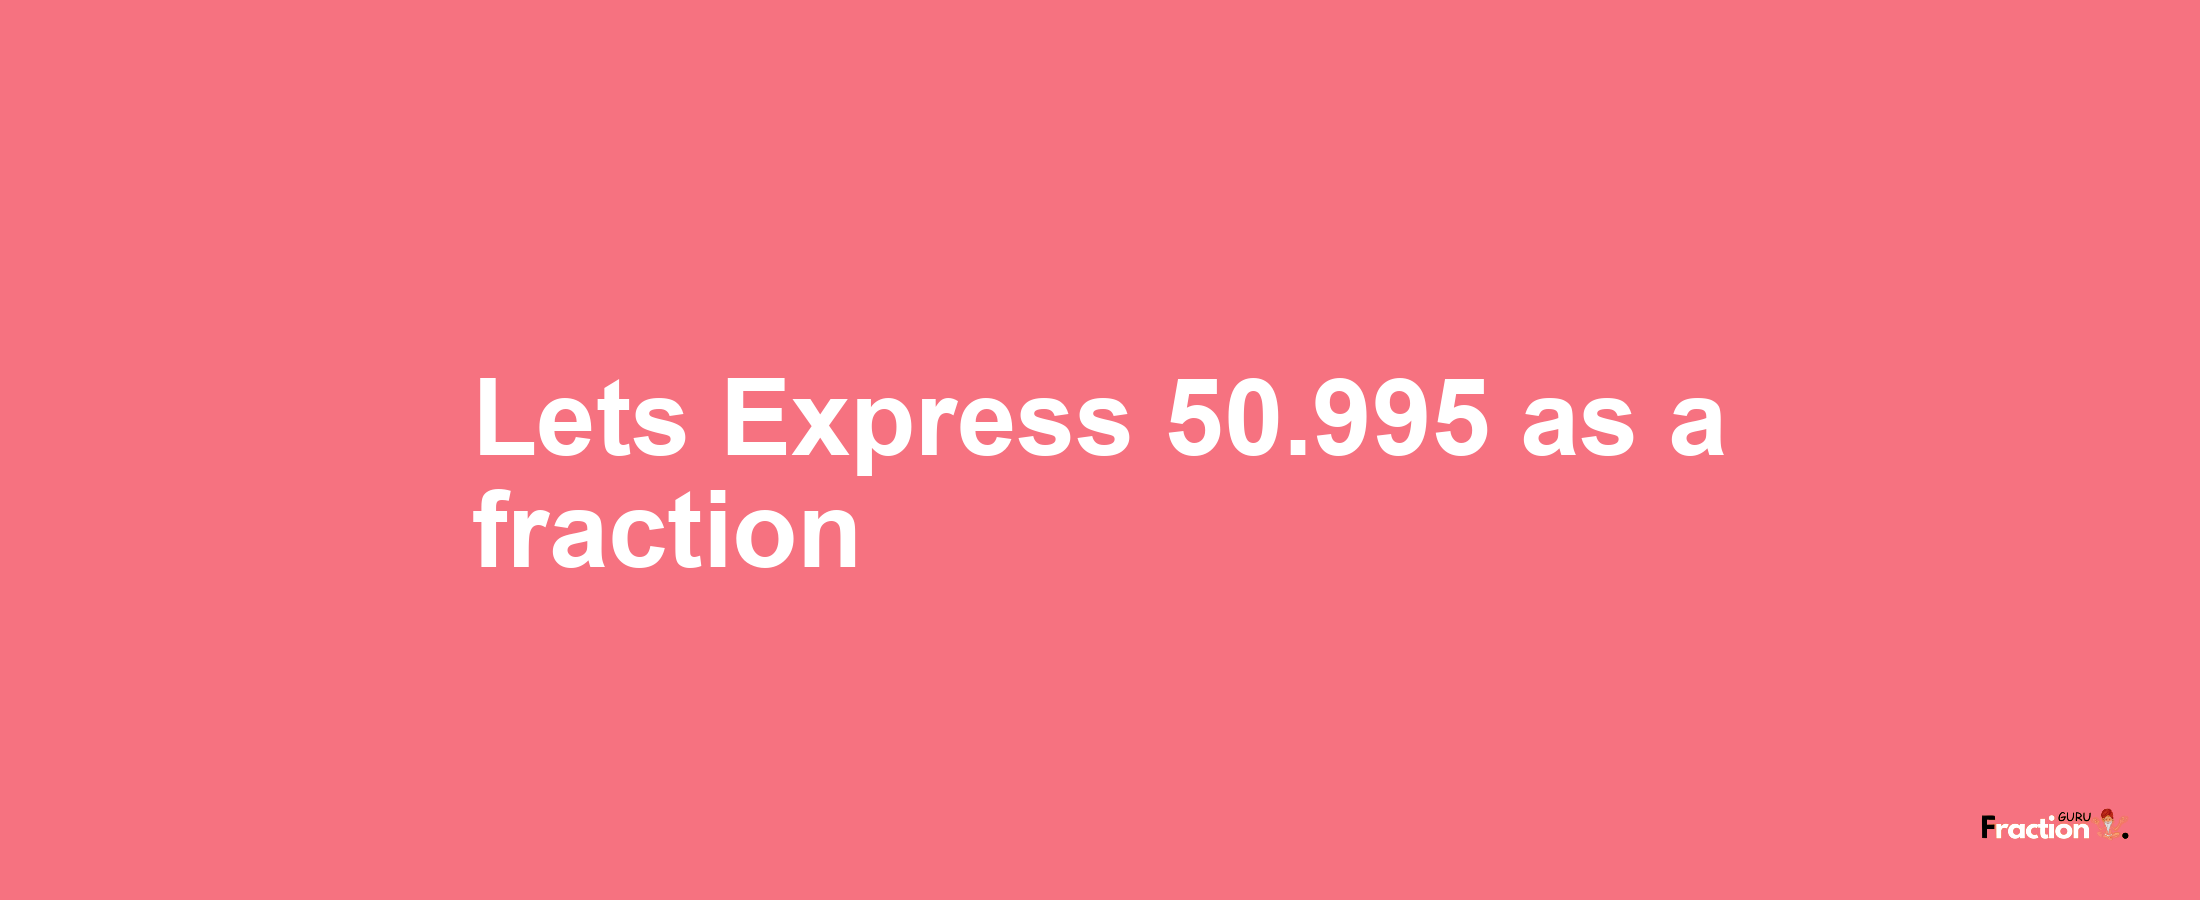 Lets Express 50.995 as afraction